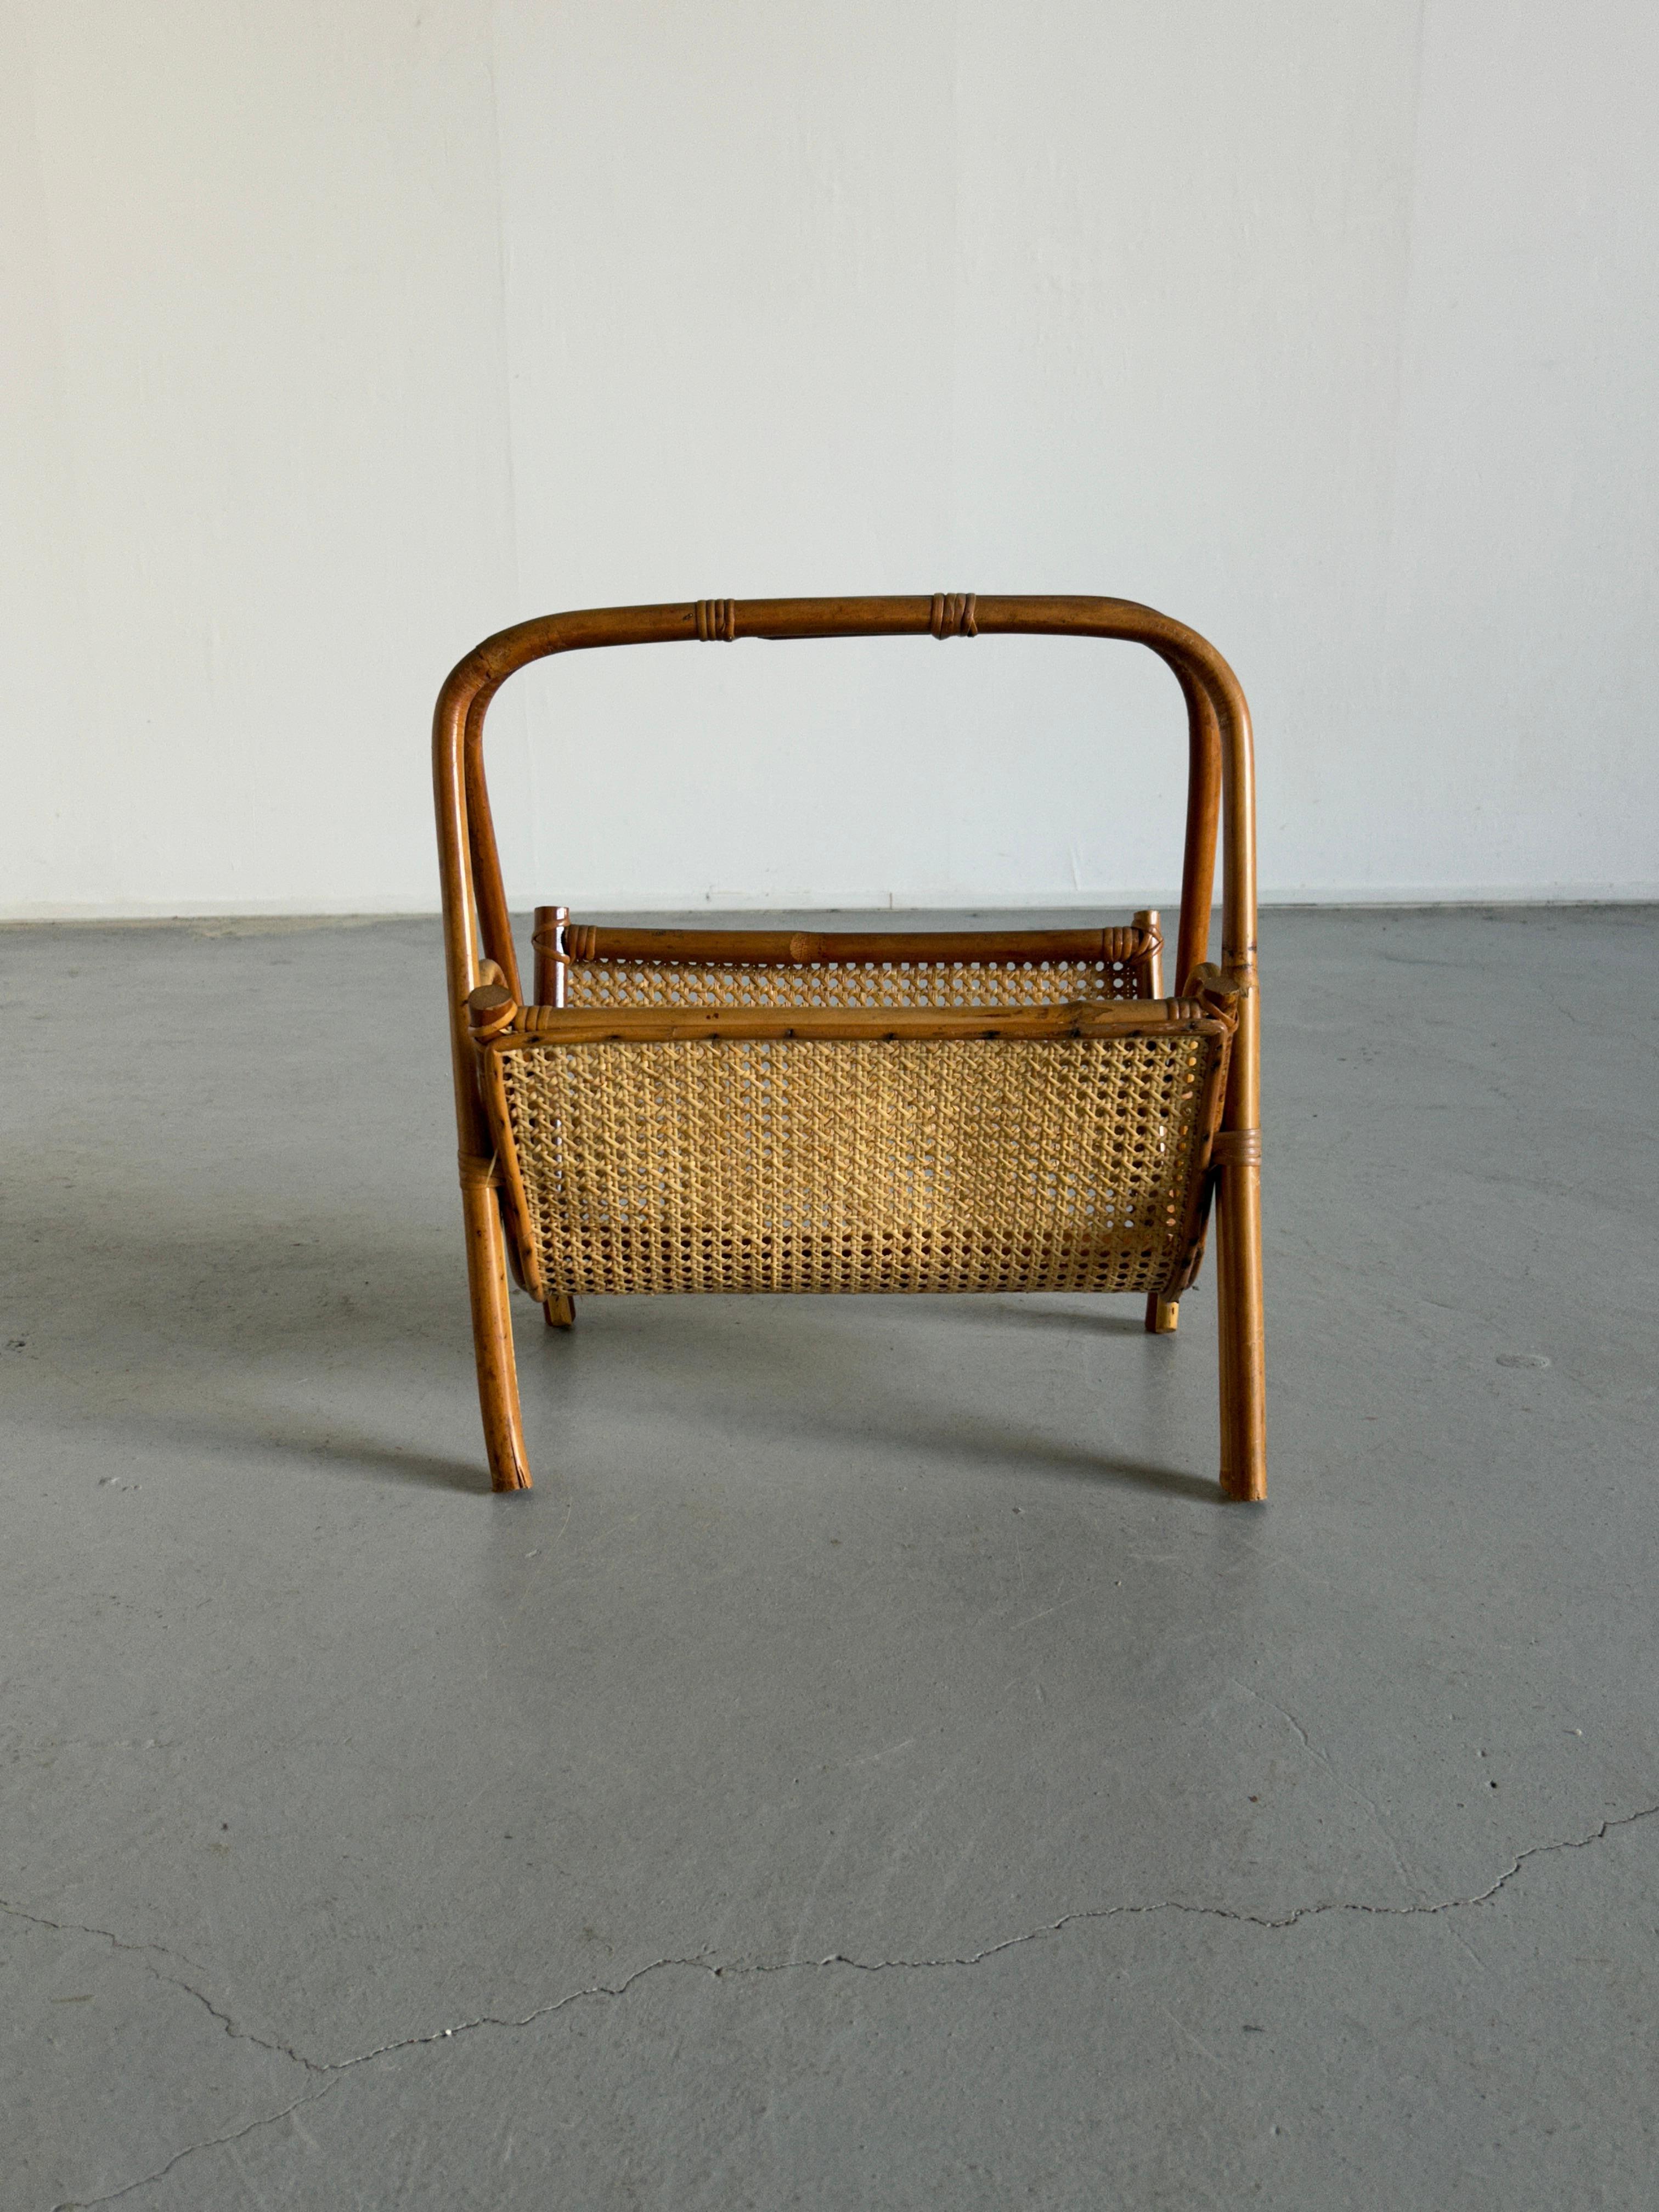 Italian Vintage Mid-Century Modern Magazine Rack in Bamboo and Cane, 1960s Italy